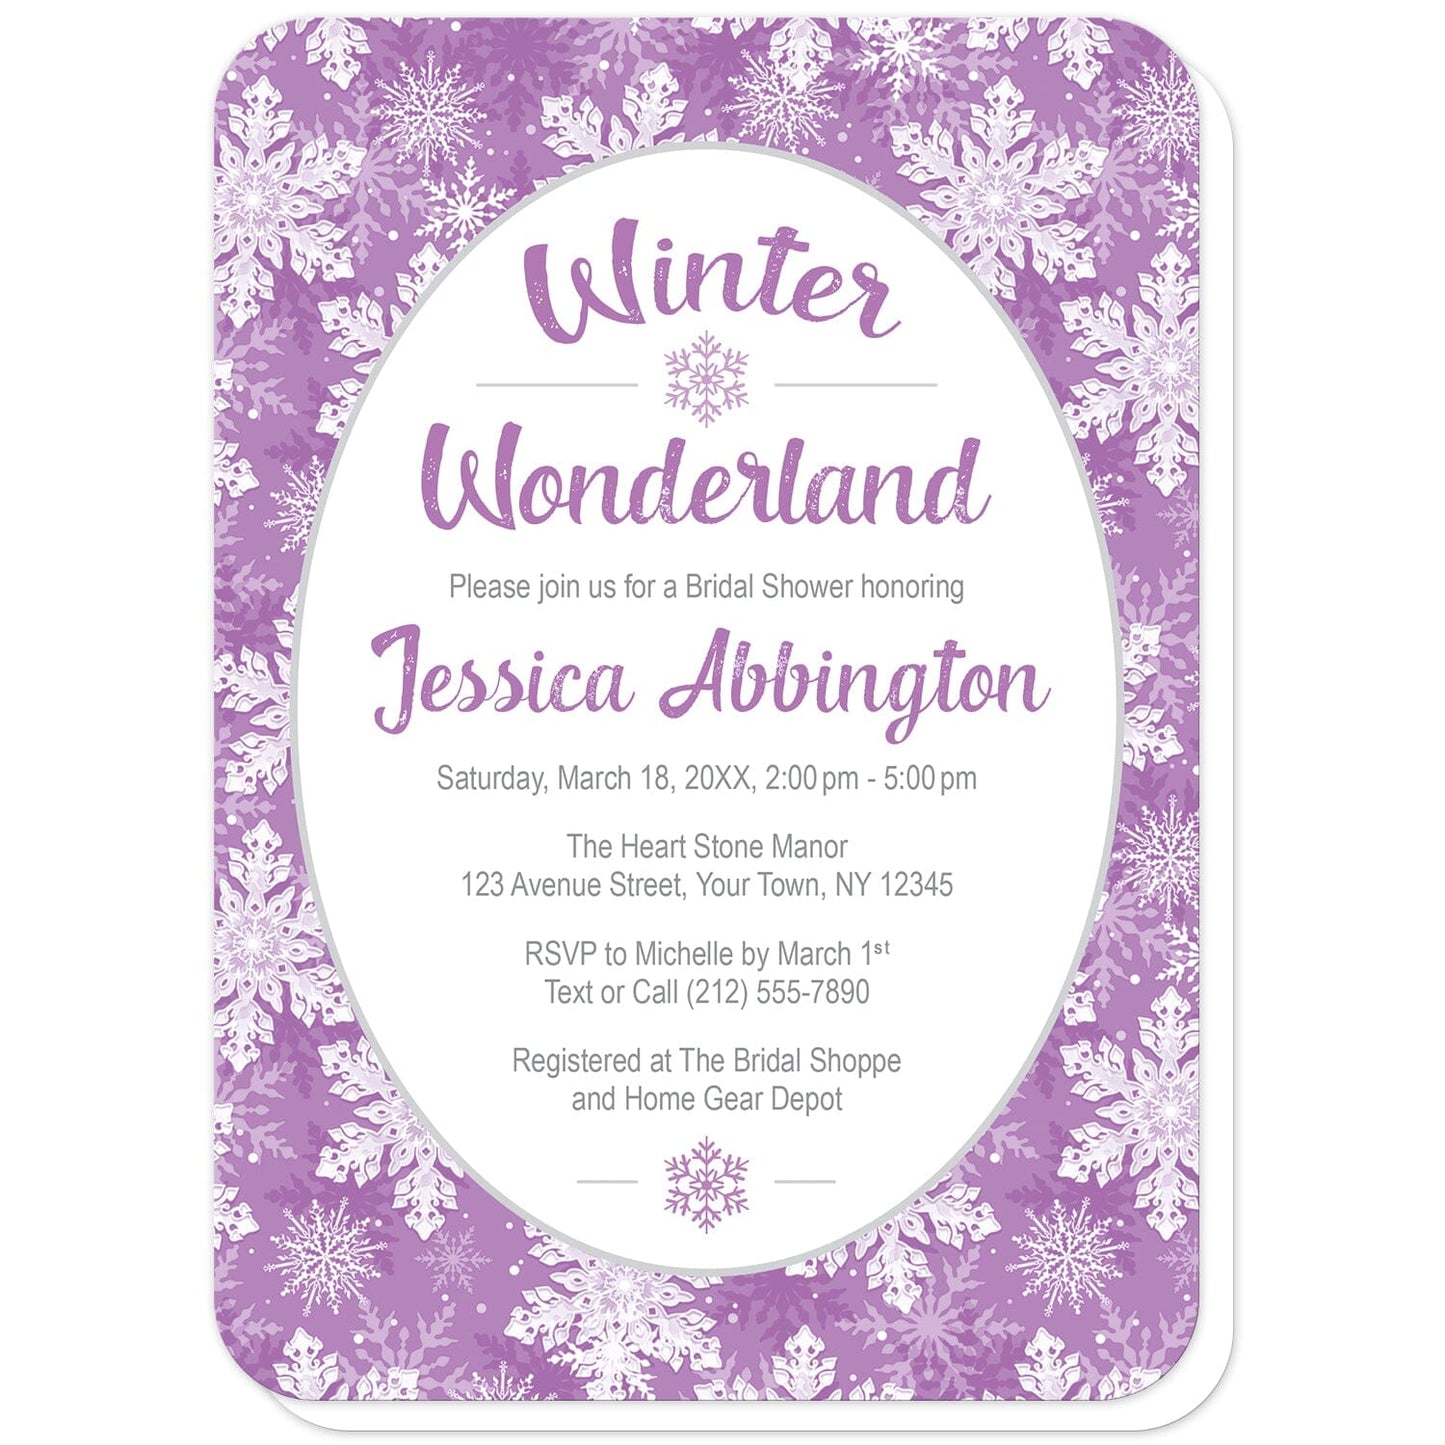 Purple Snowflake Winter Wonderland Bridal Shower Invitations (with rounded corners) at Artistically Invited. Beautifully ornate purple snowflake Winter Wonderland bridal shower invitations with your personalized bridal shower celebration details custom printed in purple and gray in a white oval frame design over a beautiful and ornate purple and white snowflake pattern background.